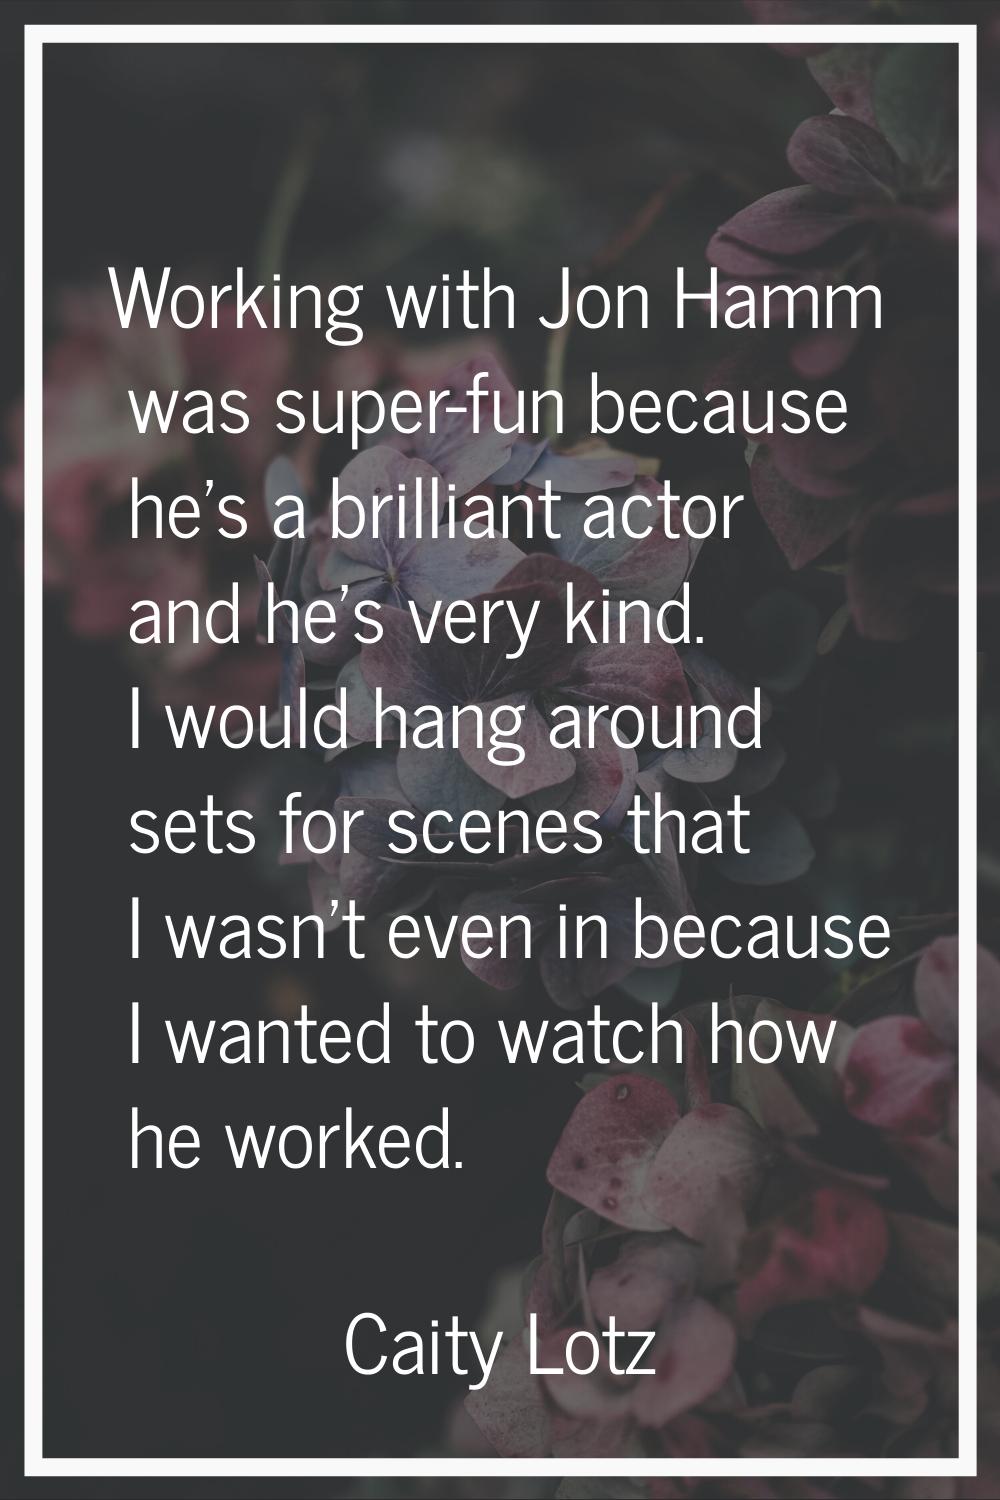 Working with Jon Hamm was super-fun because he's a brilliant actor and he's very kind. I would hang